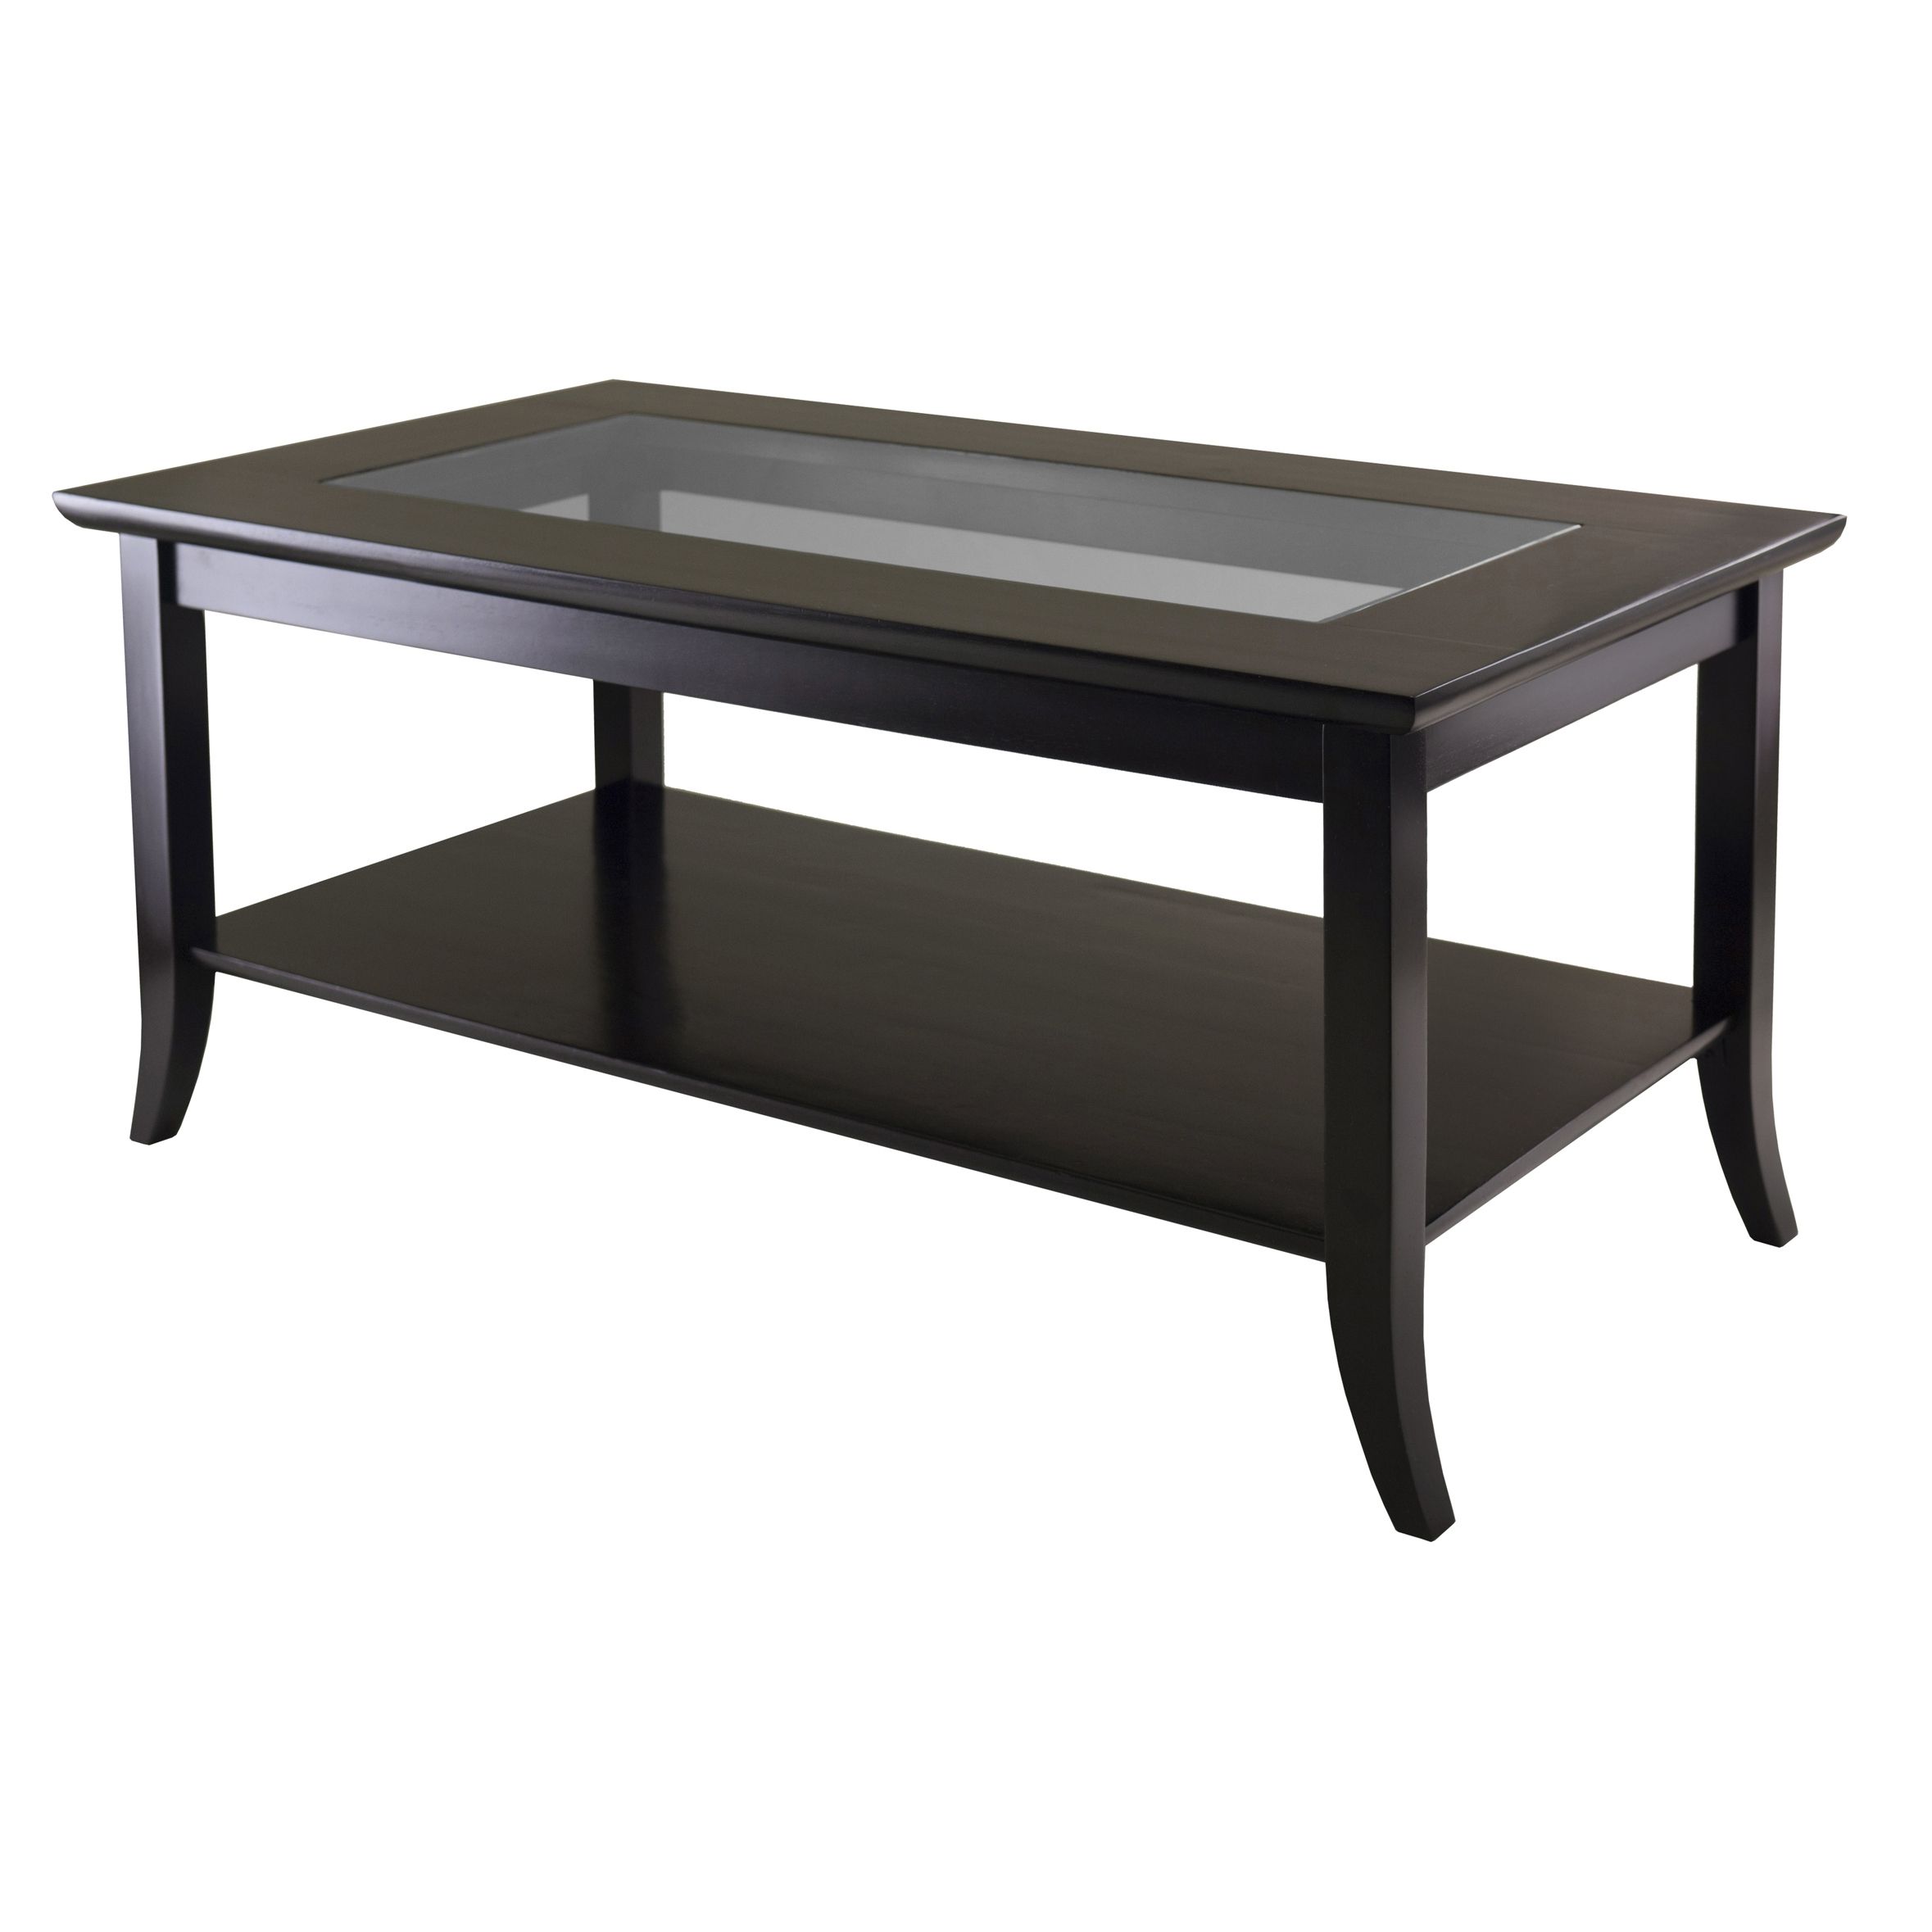 Winsome Wood Genoa Coffee Glass Top Table, Espresso Finish Intended For Rectangular Brass Finish And Glass Coffee Tables (View 30 of 30)